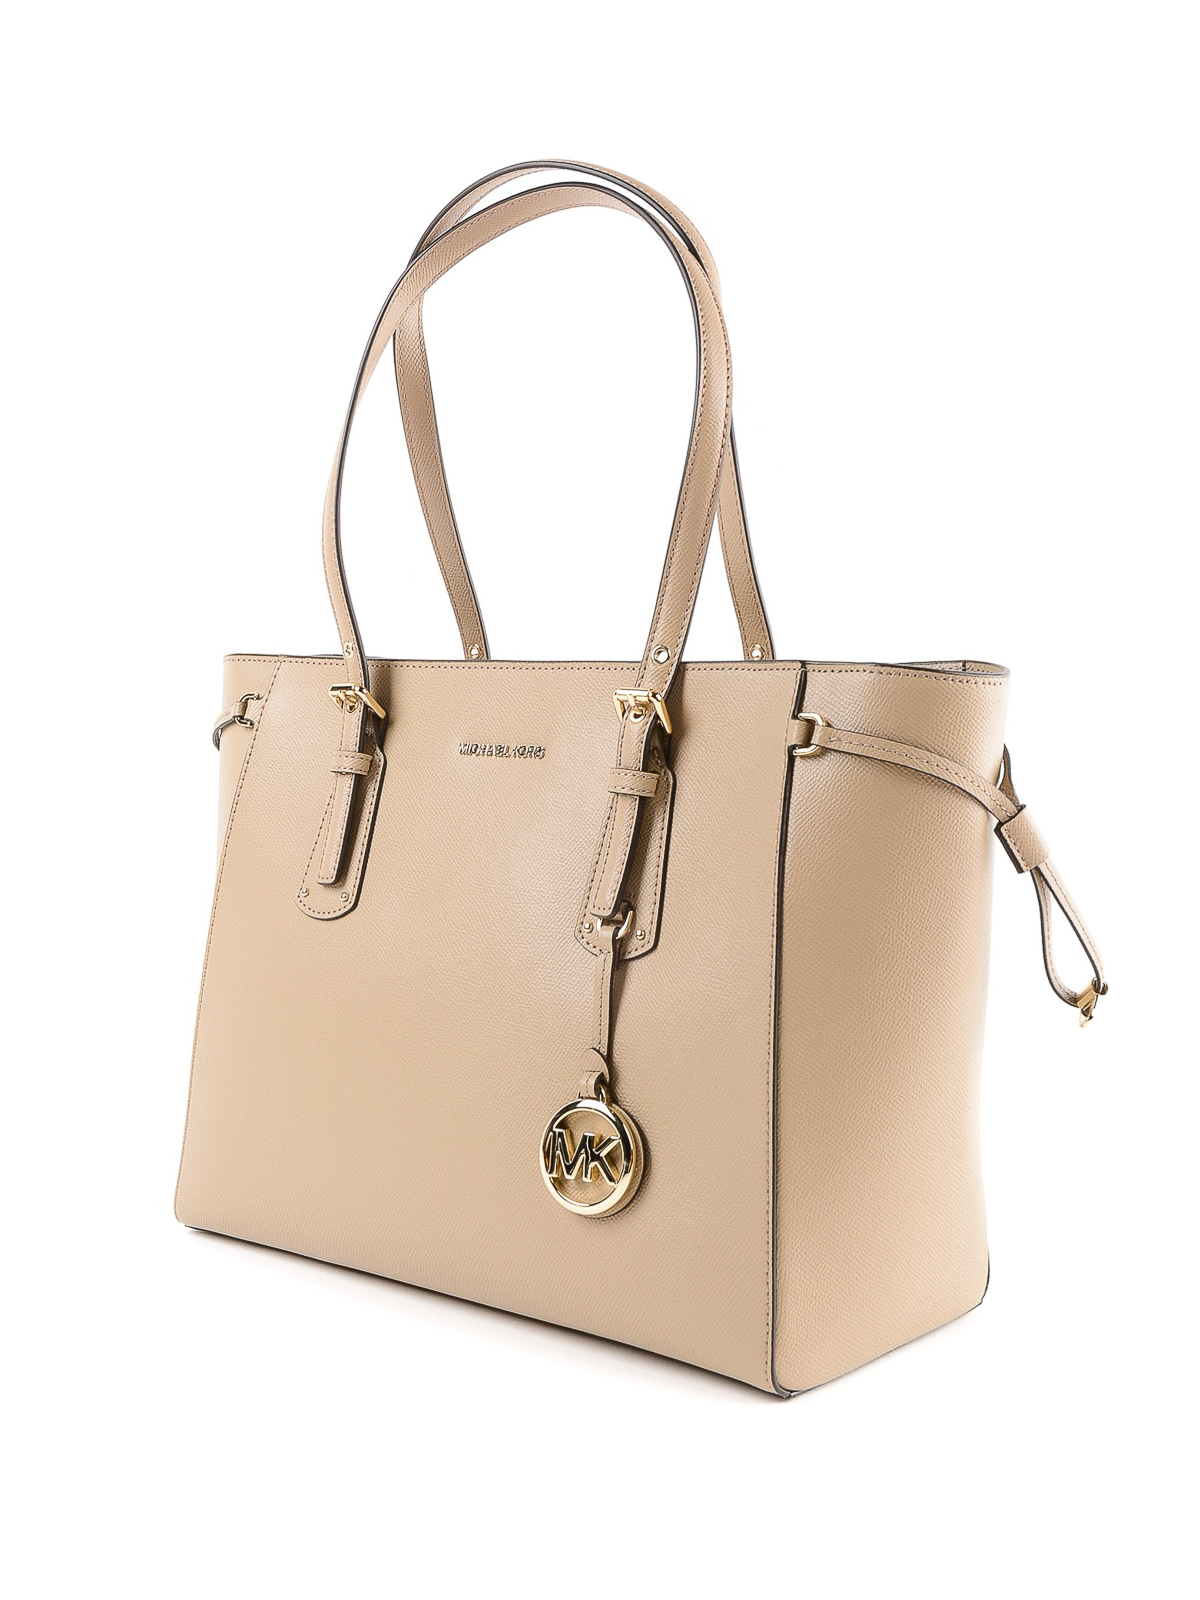 Totes bags Michael Kors - Voyager white leather medium tote